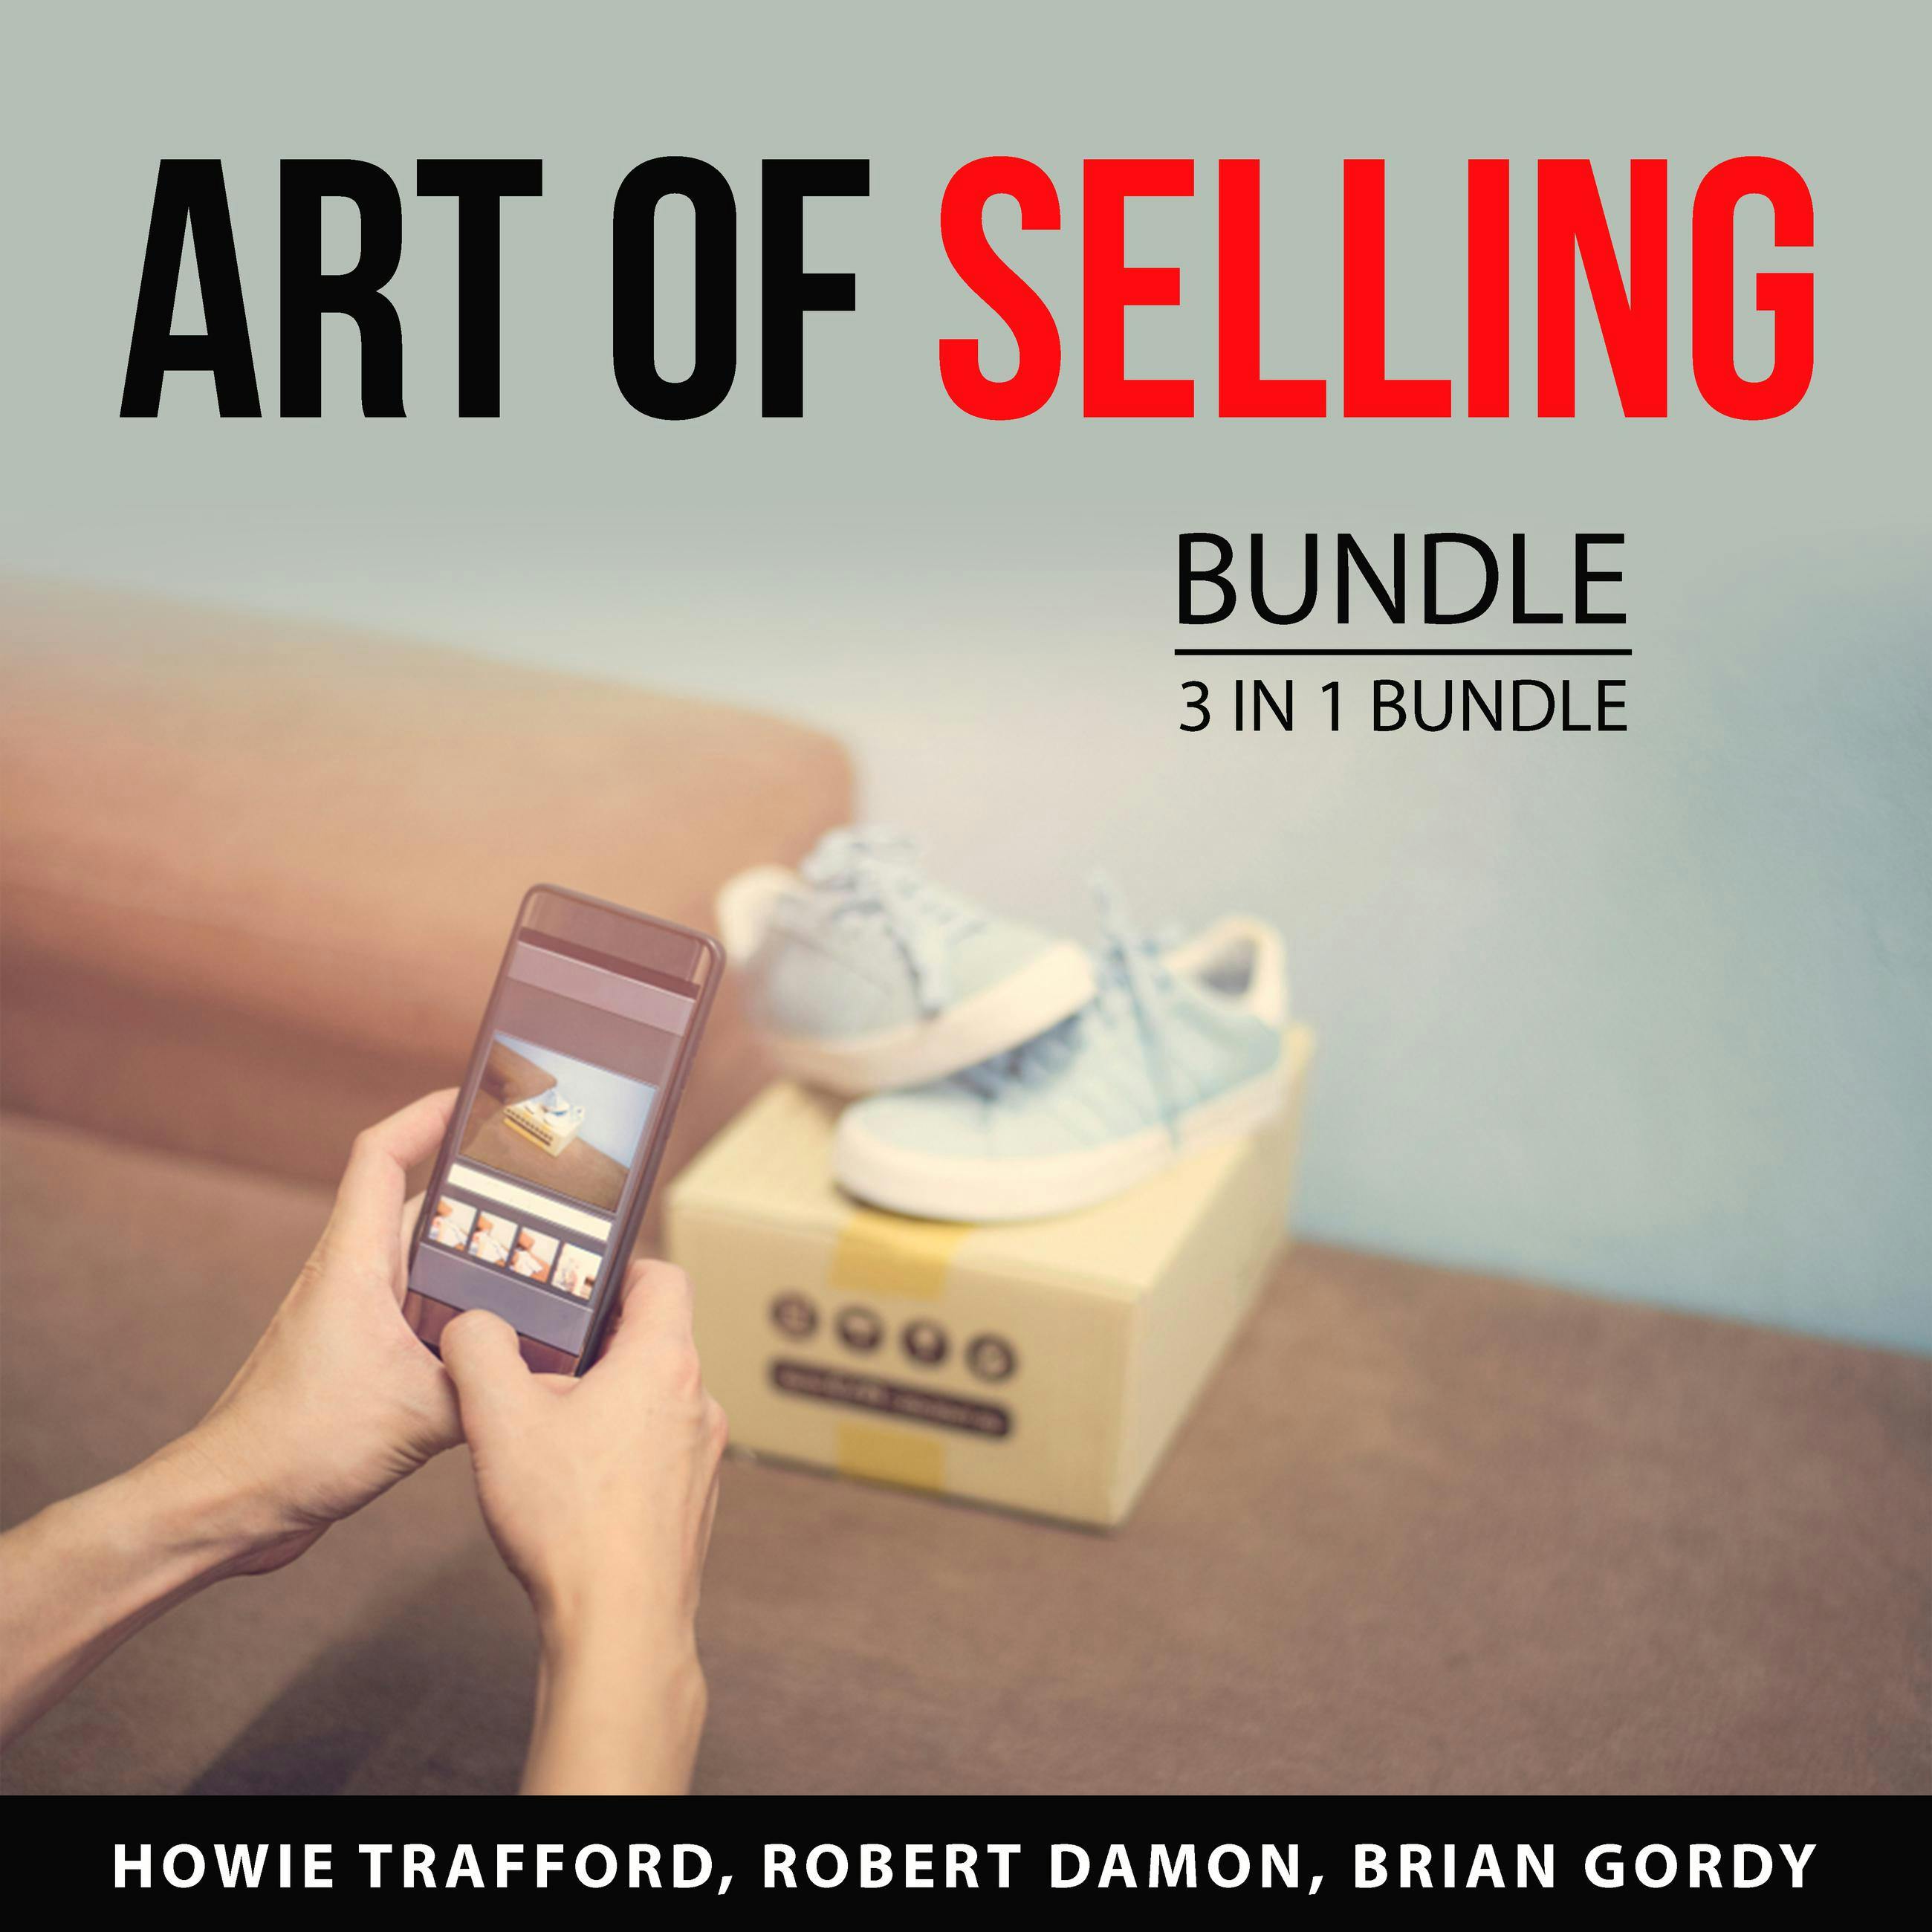 Art of Selling Bundle, 3 in 1 Bundle: How to Create a Bestseller, Close Every Sale, and Pricing Strategies - Brian Gordy, Howie Trafford, Robert Damon